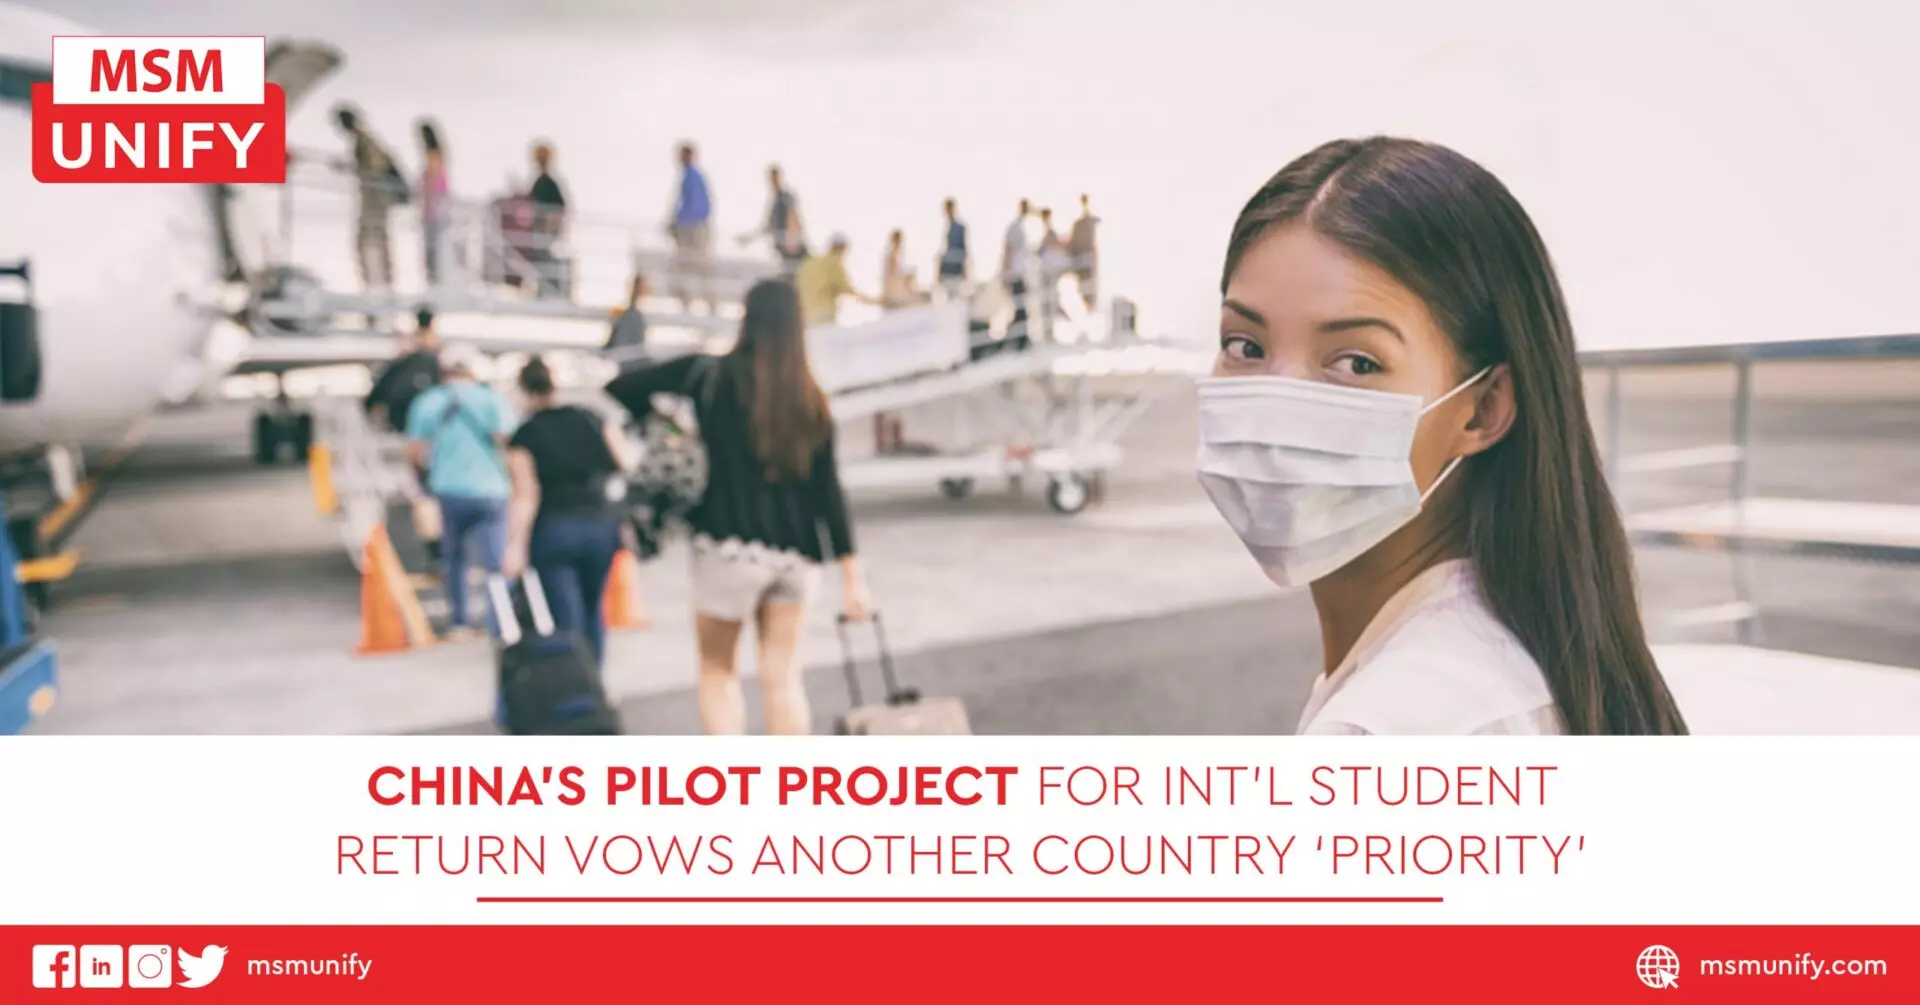 Chinas Pilot Project for Intl Student Return Vows Another Country Priority scaled 1